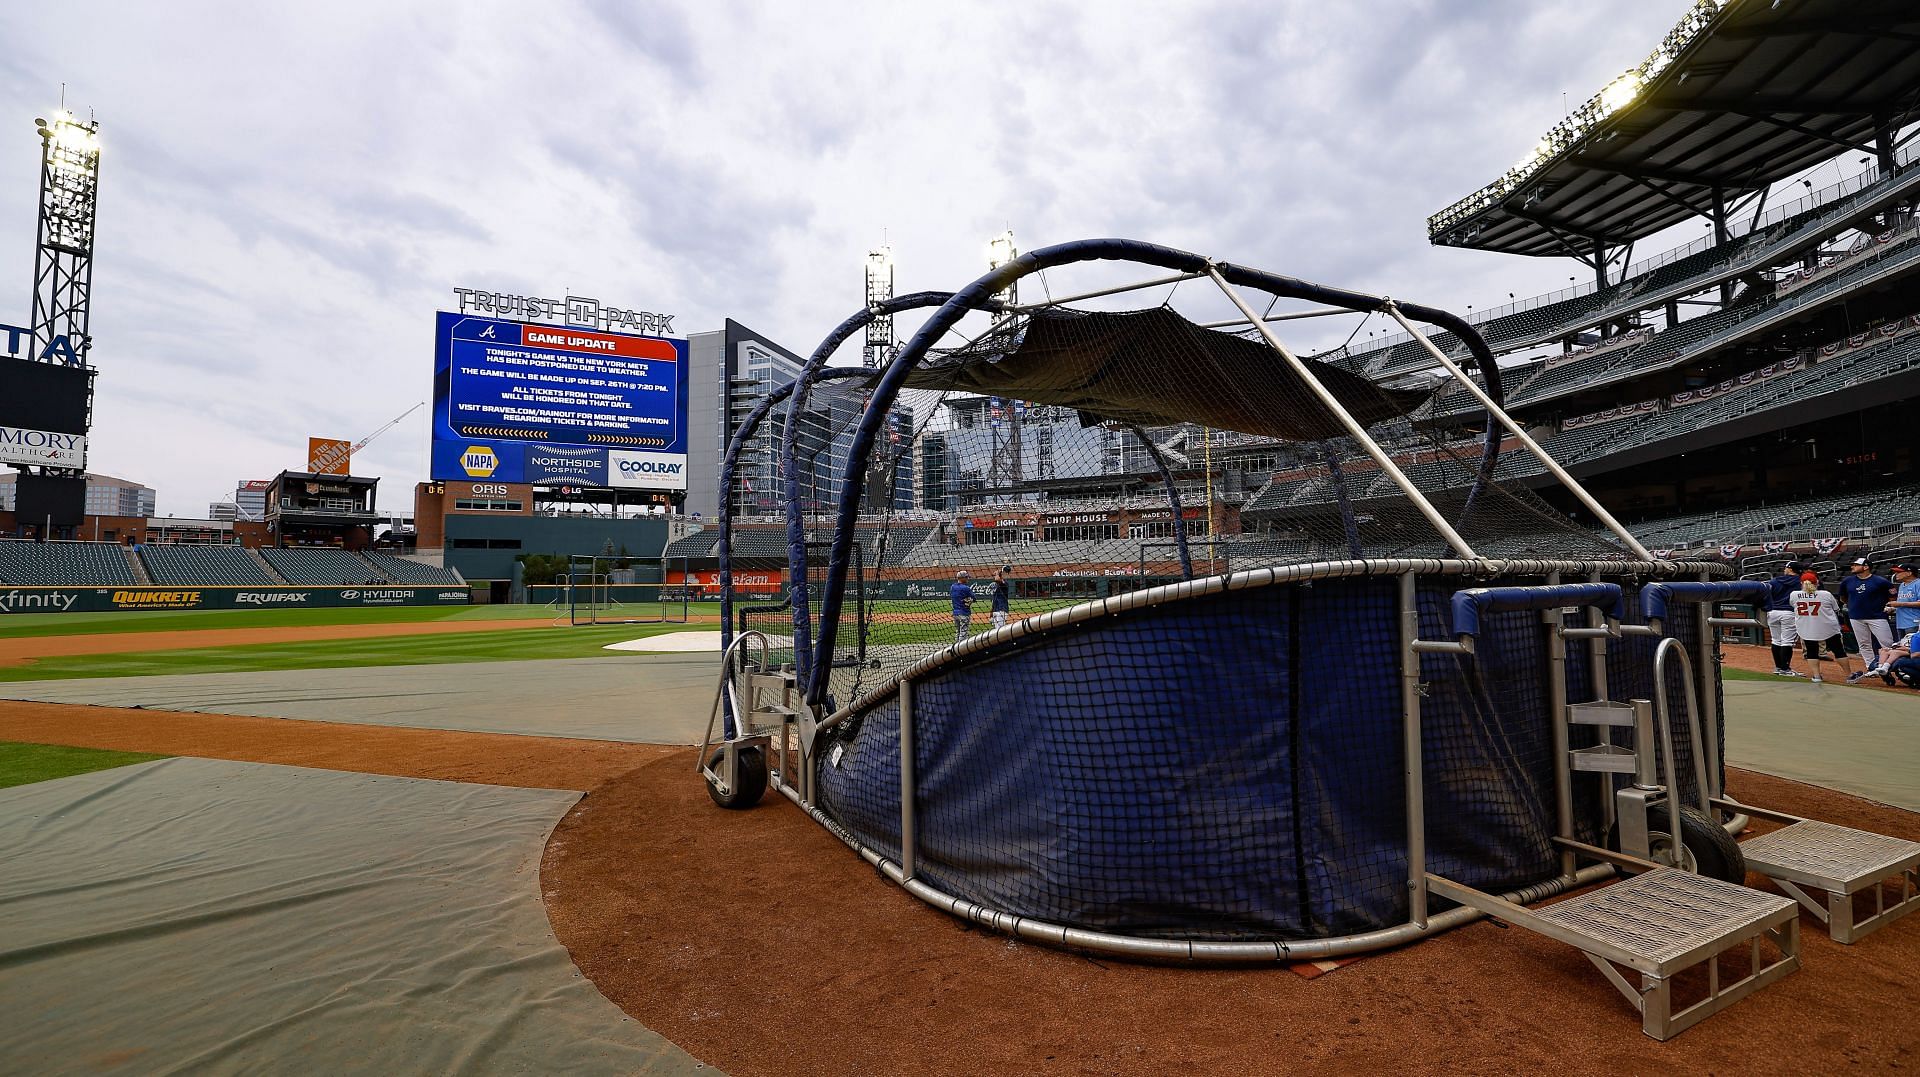 The Braves and Mets lost one game to weather last night